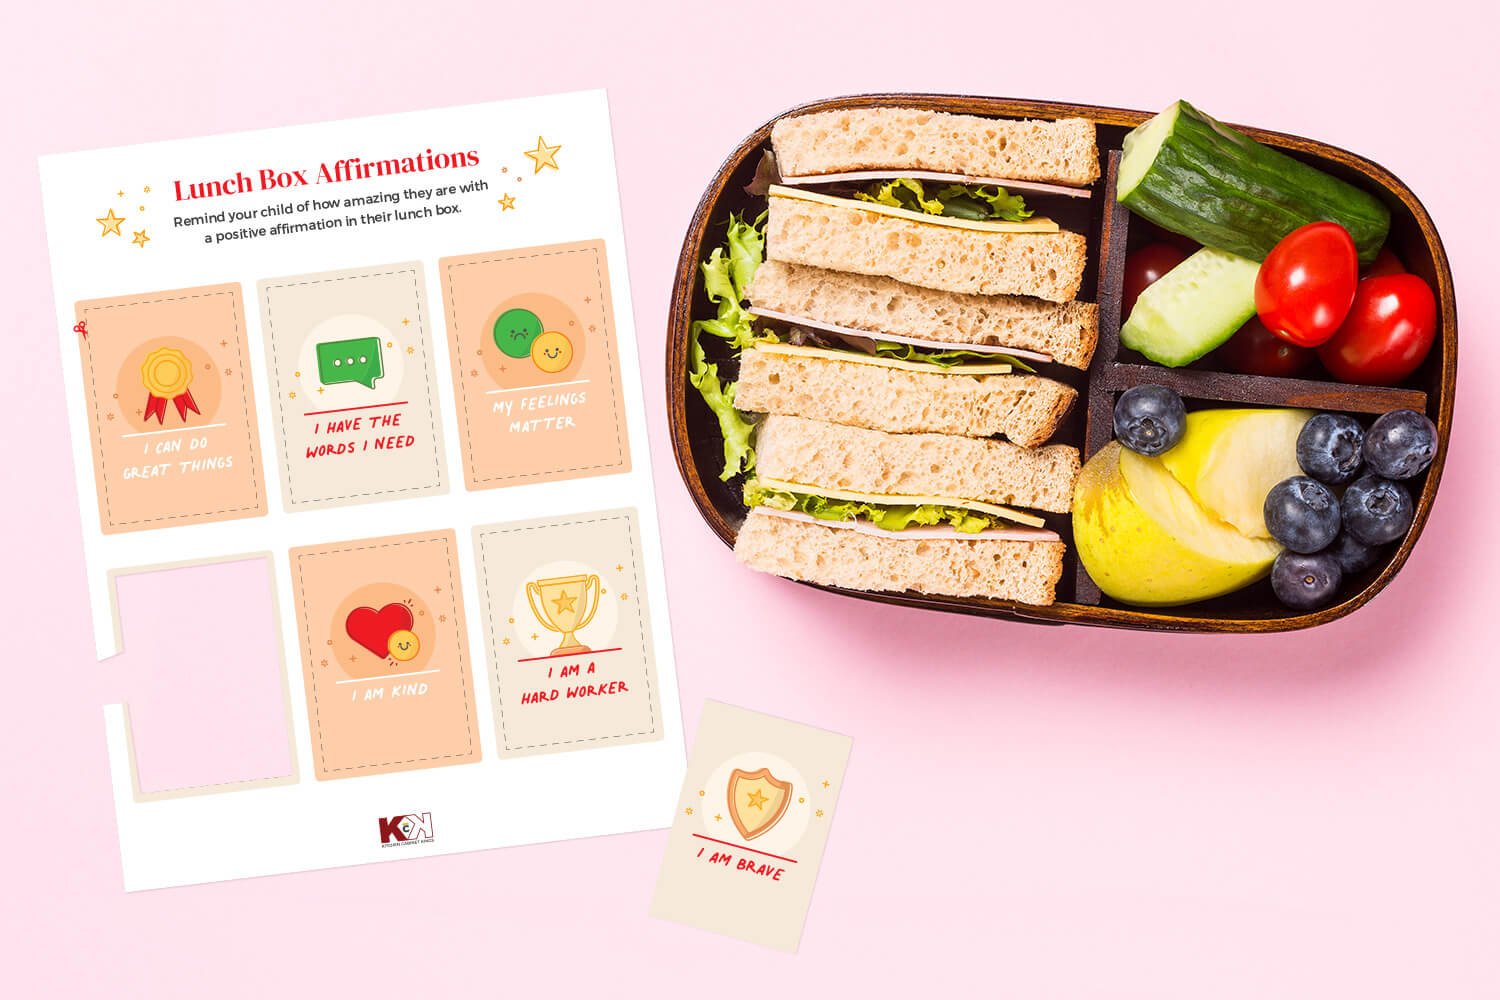 Printable lunch box affirmation cards next to a packed lunch box with sandwiches, fruits, and veggies on a pink background.